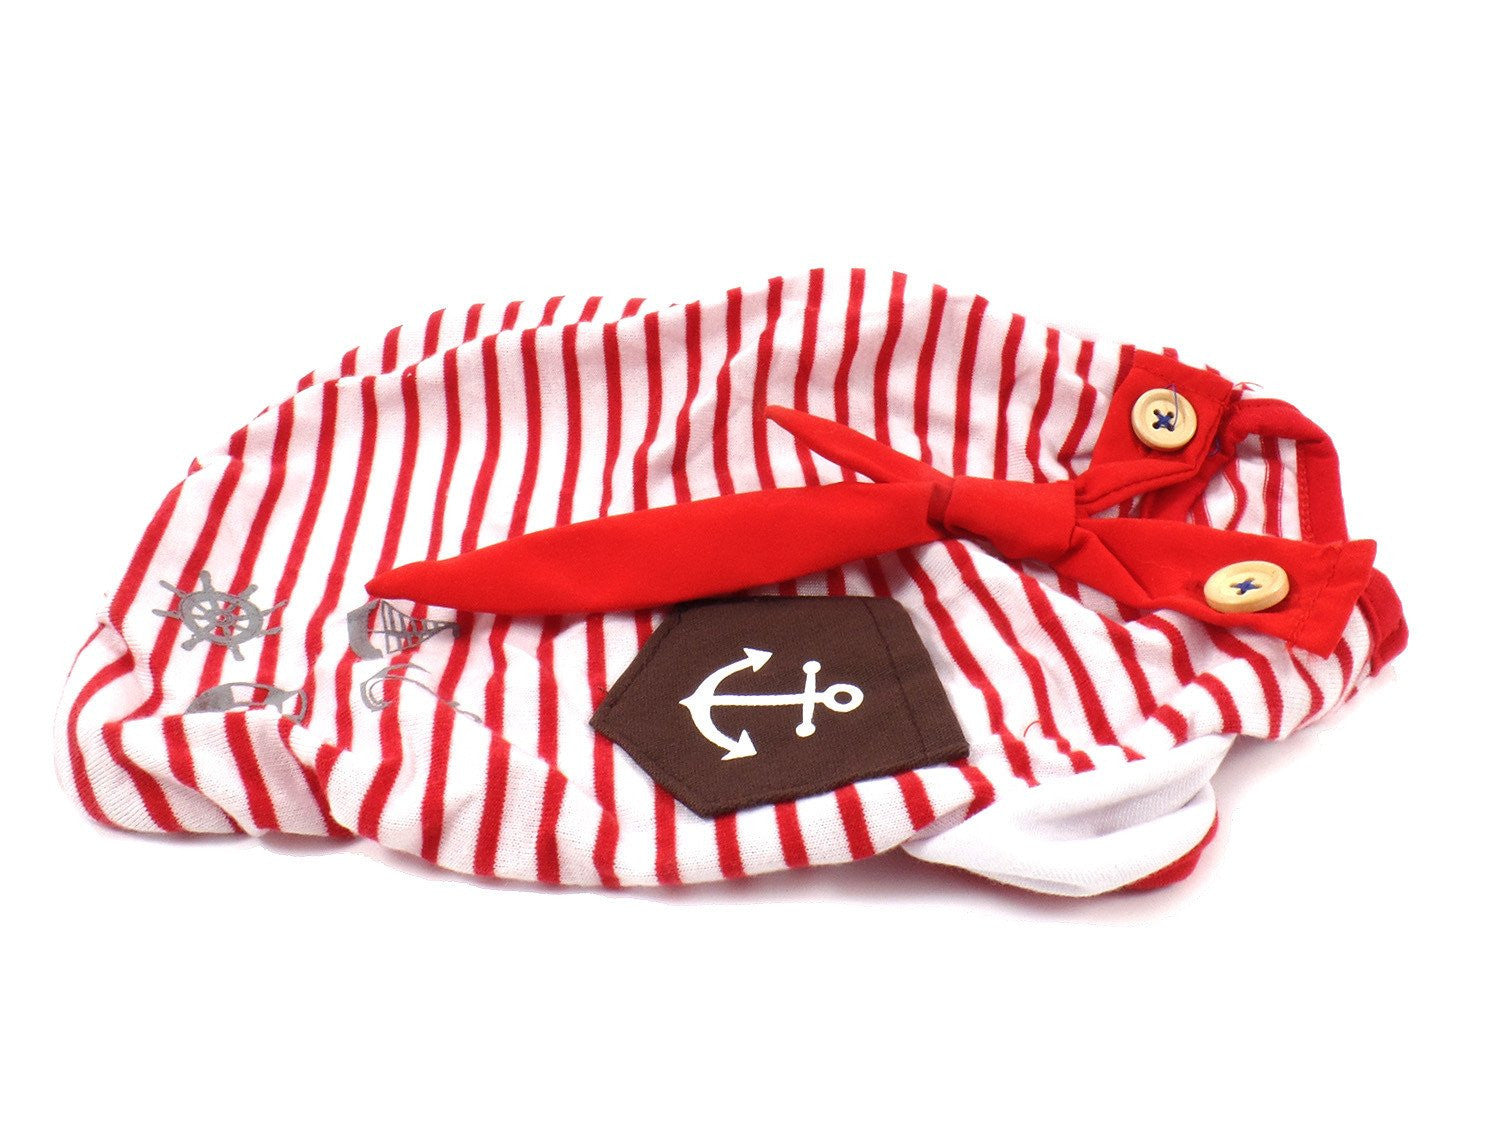 Dog Tee Red Striped with Scarf - Beach & Dog Co.